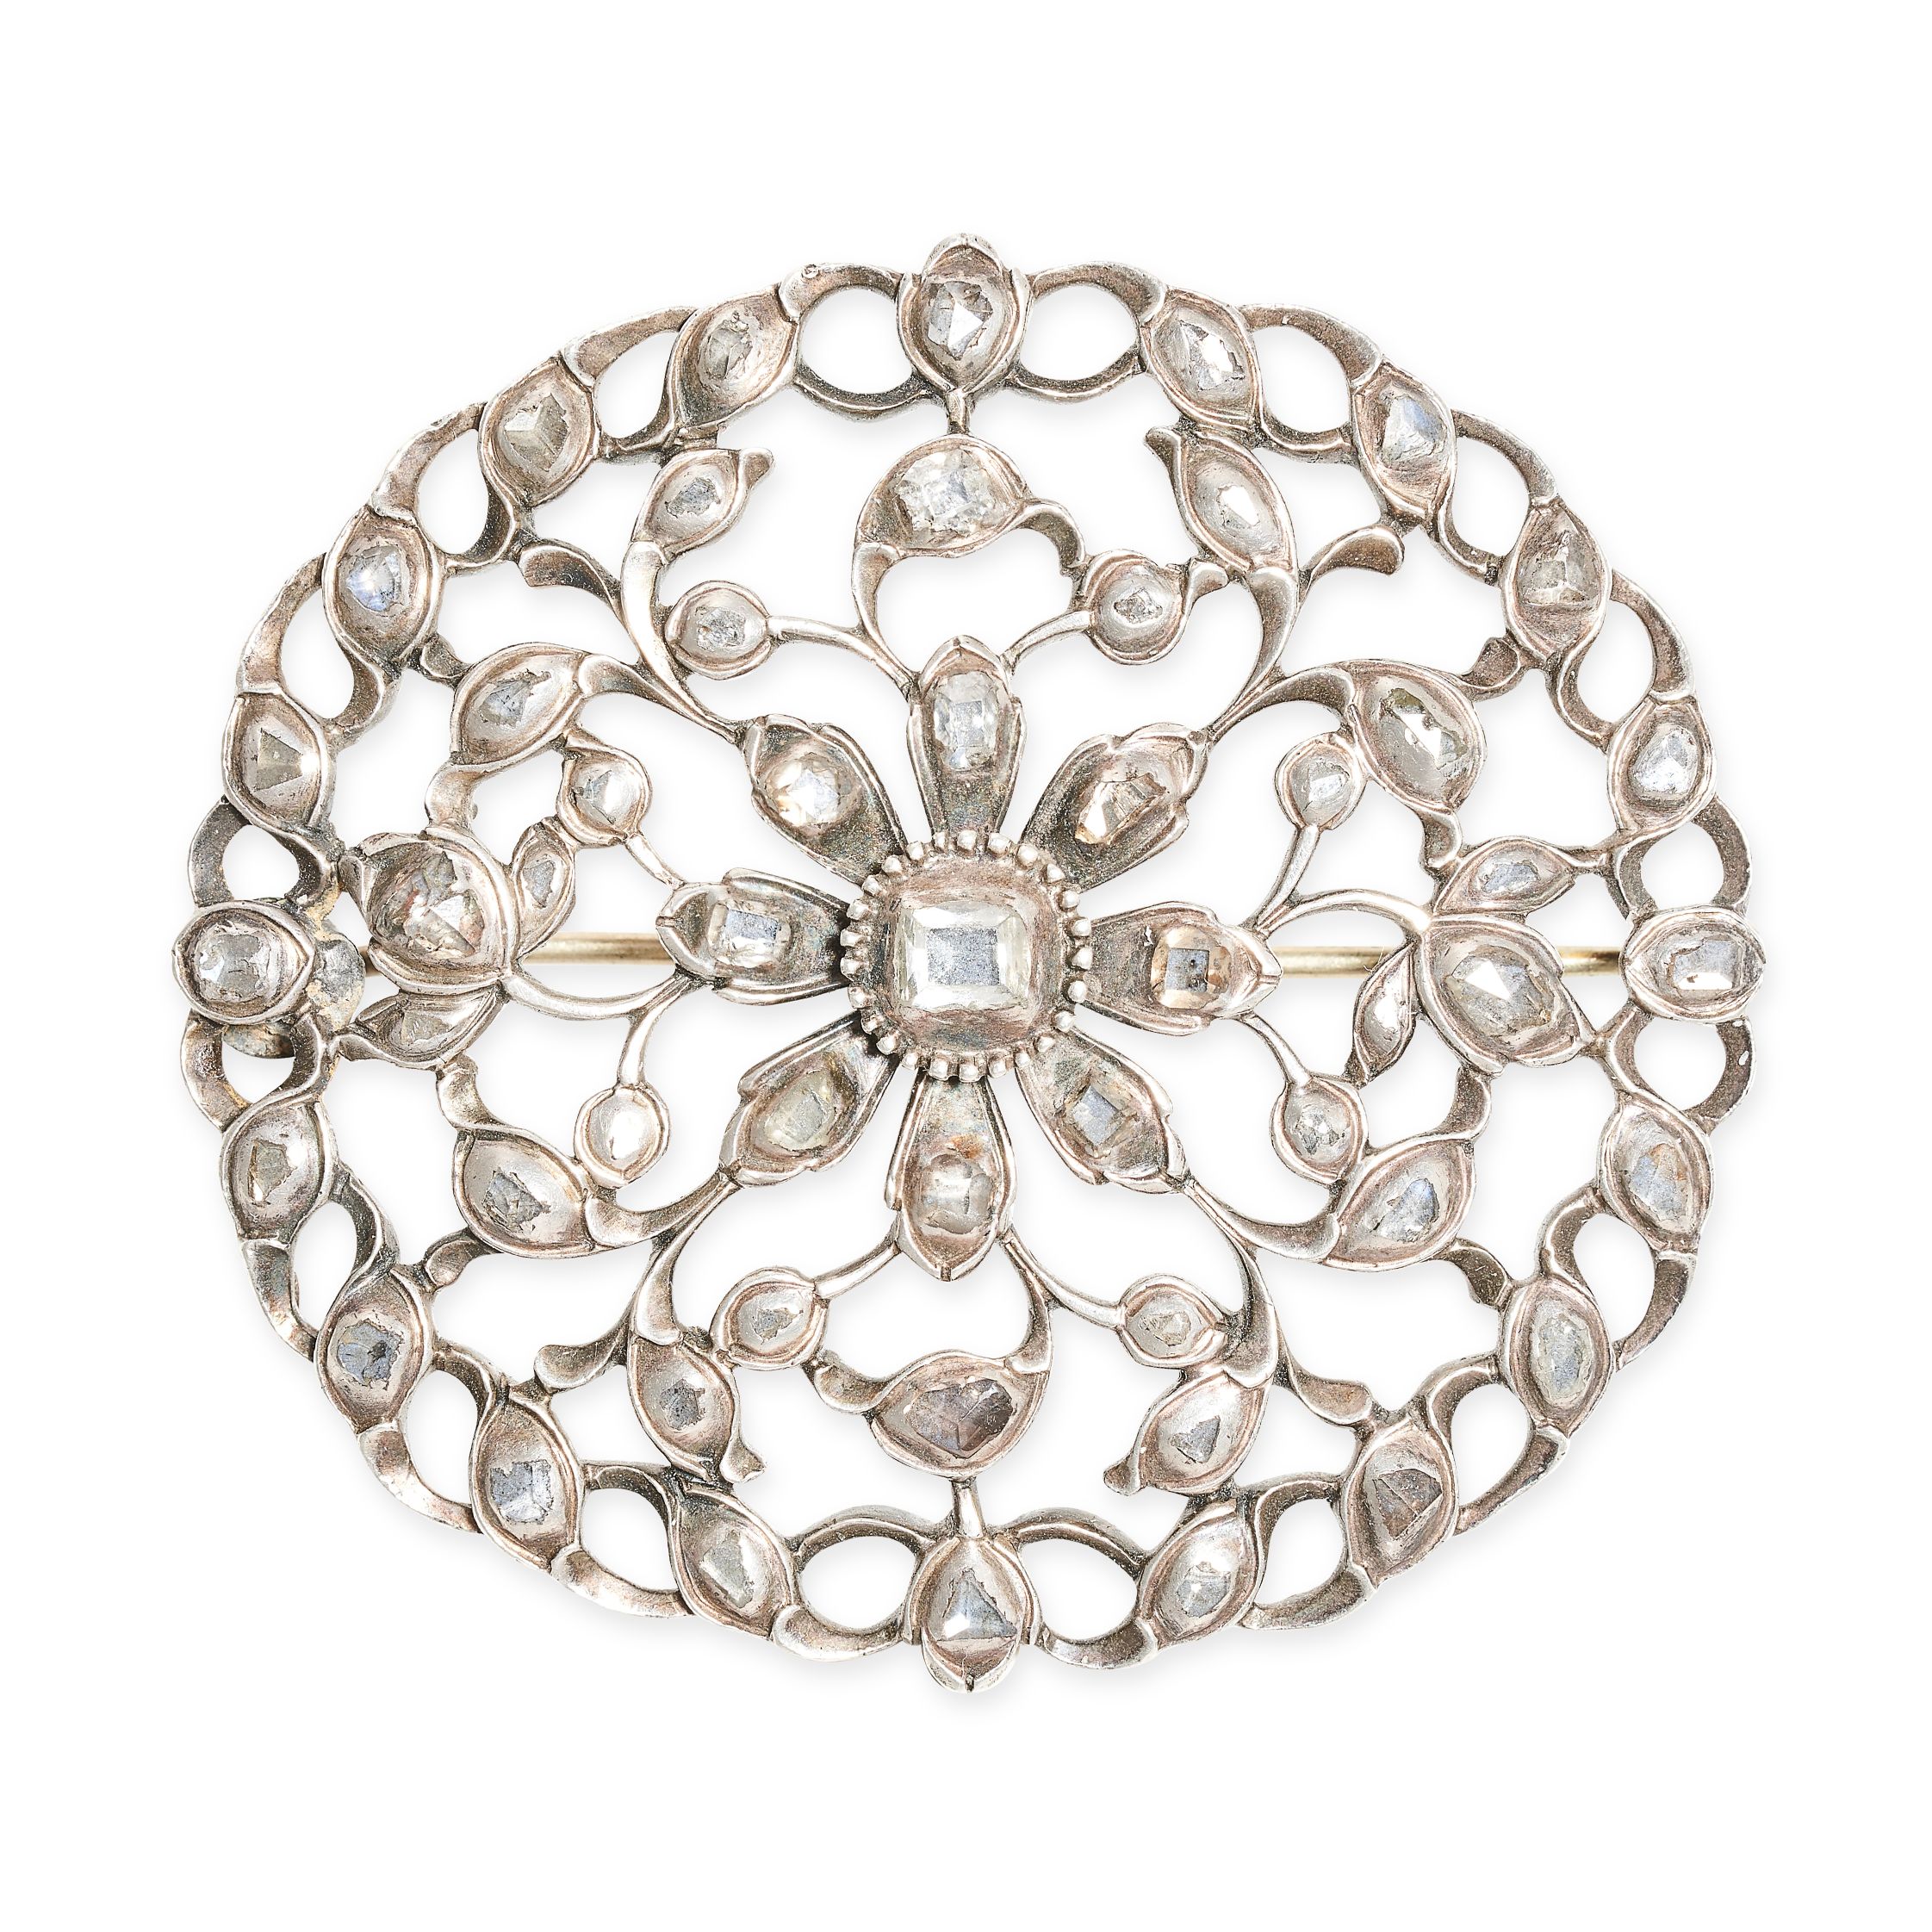 NO RESERVE - AN ANTIQUE DIAMOND BROOCH, 18TH CENTURY the oval body in open foliate design, set wi...